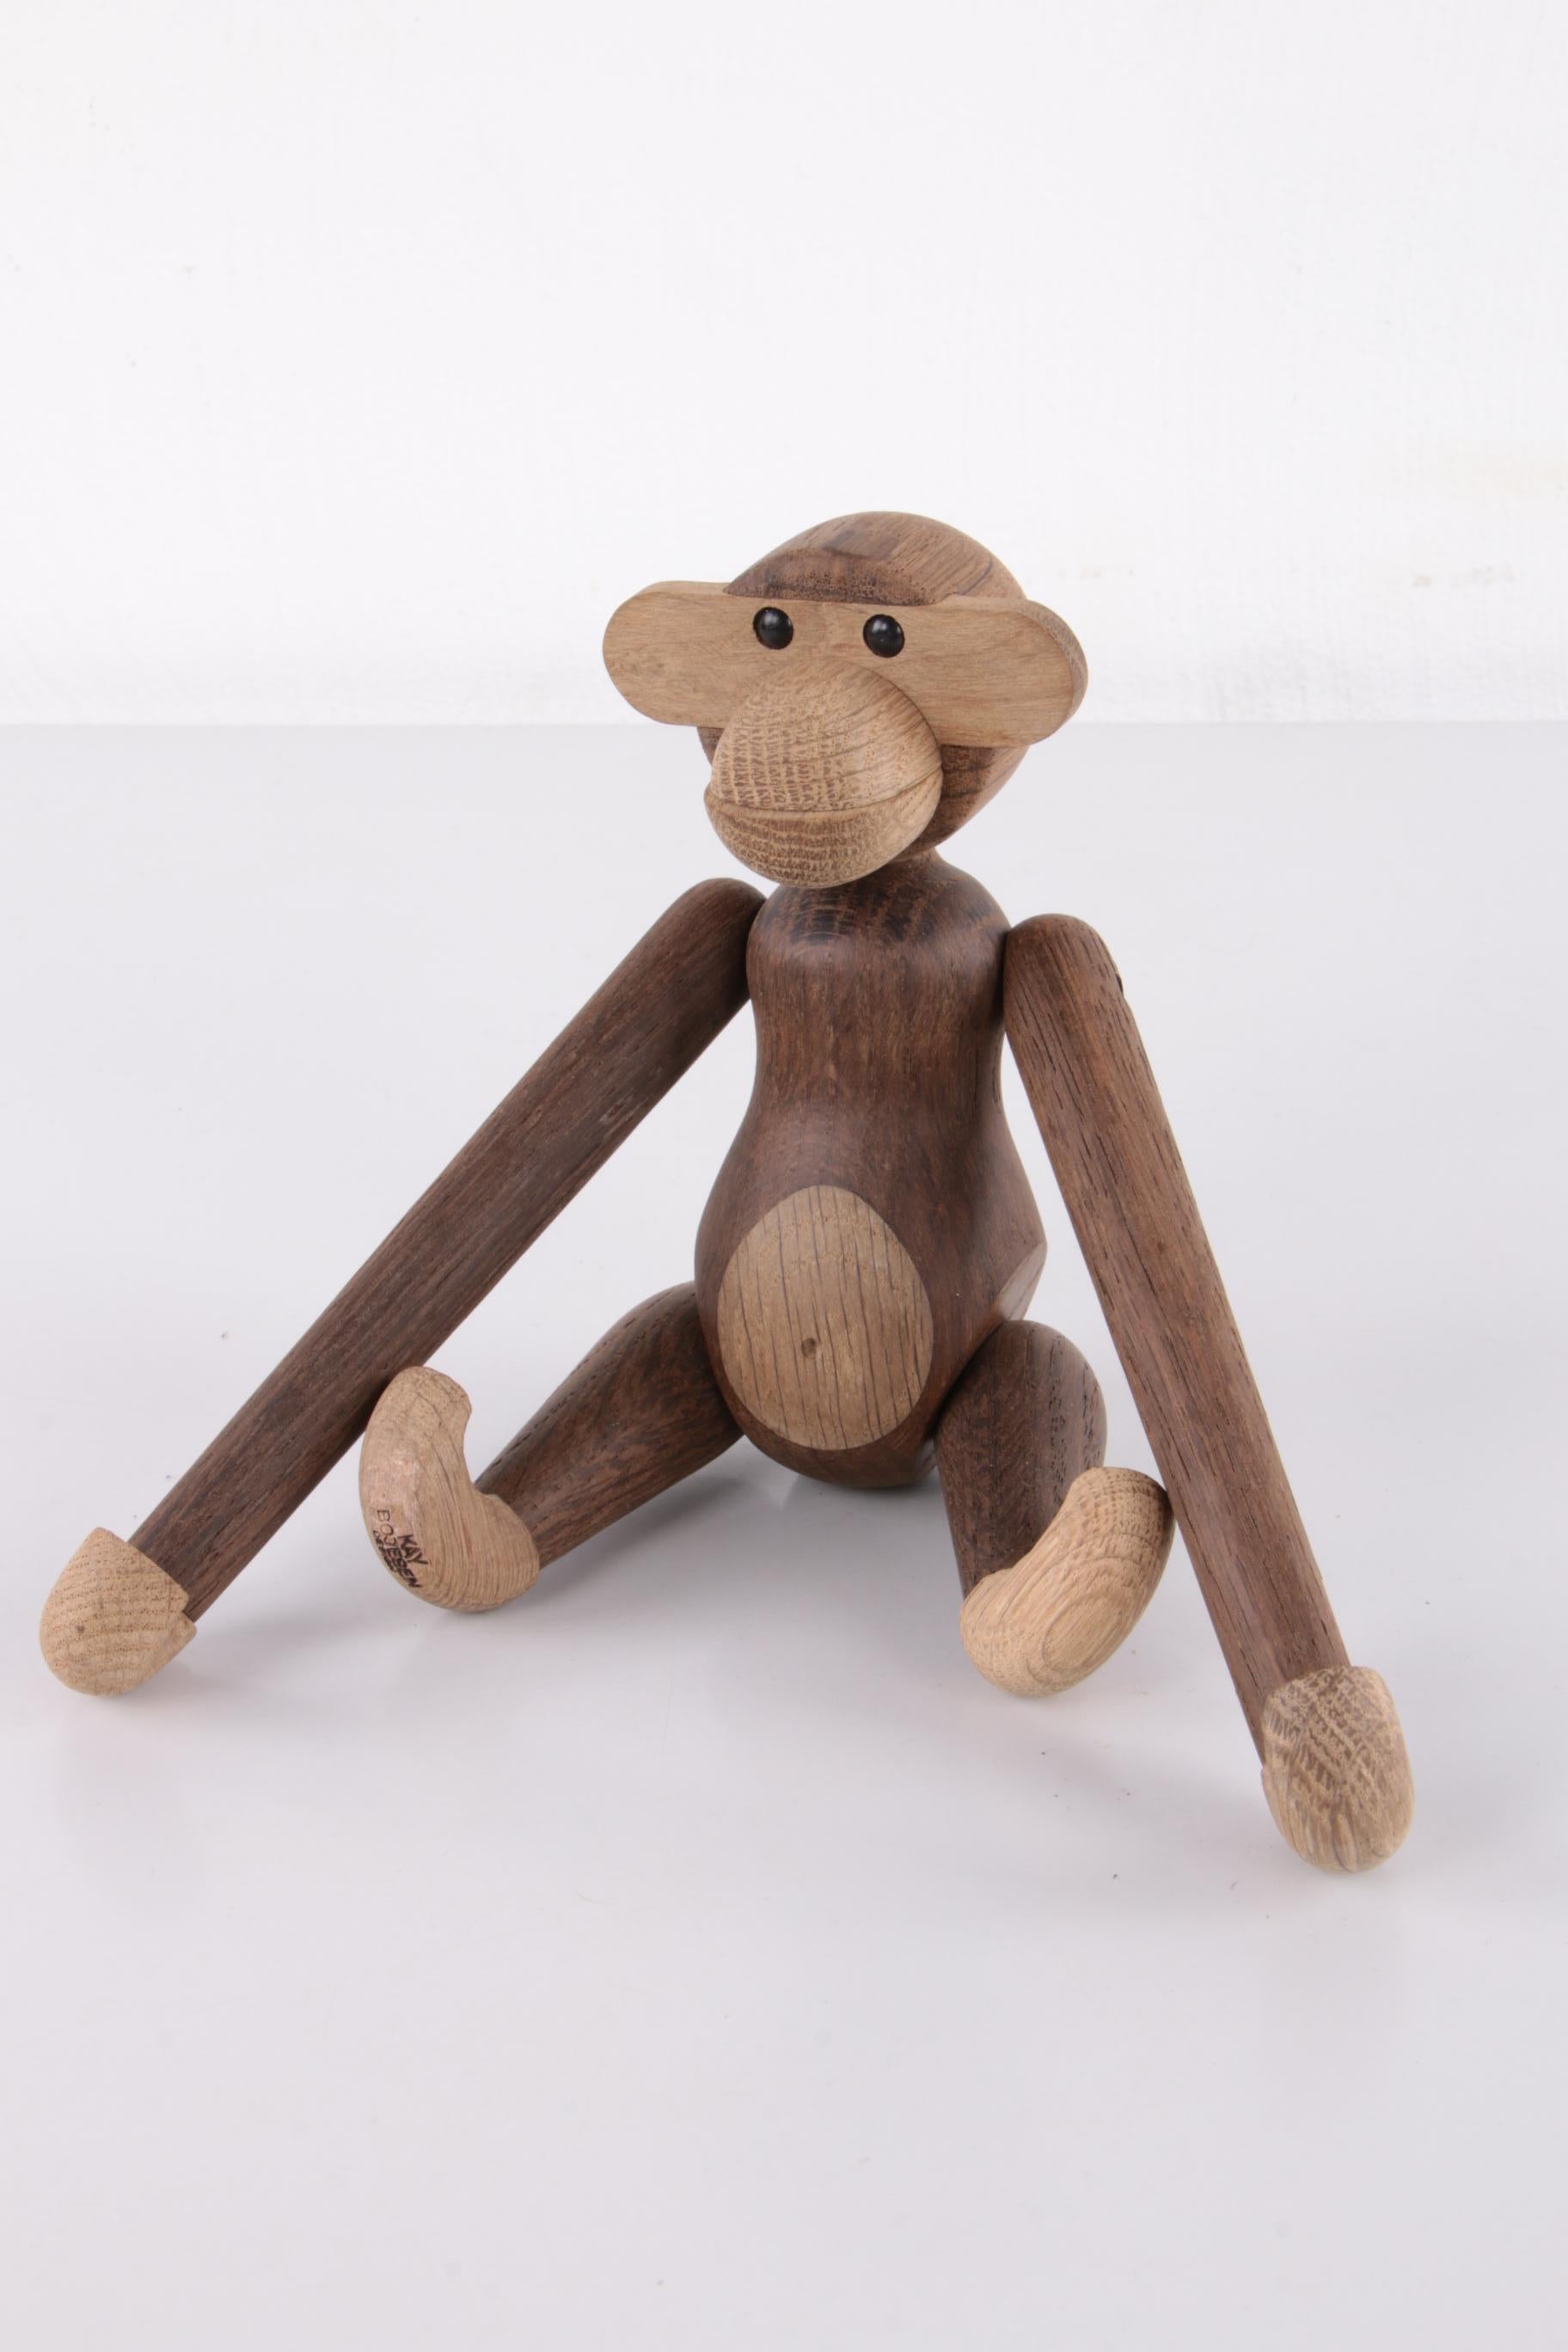 Original Kay Bojesen monkey monkey size small


Kay Bojesens Monkey was born in Denmark in 1951 and is made of teak and lima wood.

This monkey is size small when we put the arms up 28 cm in total.

From the head to the feet it is 20 cm. We